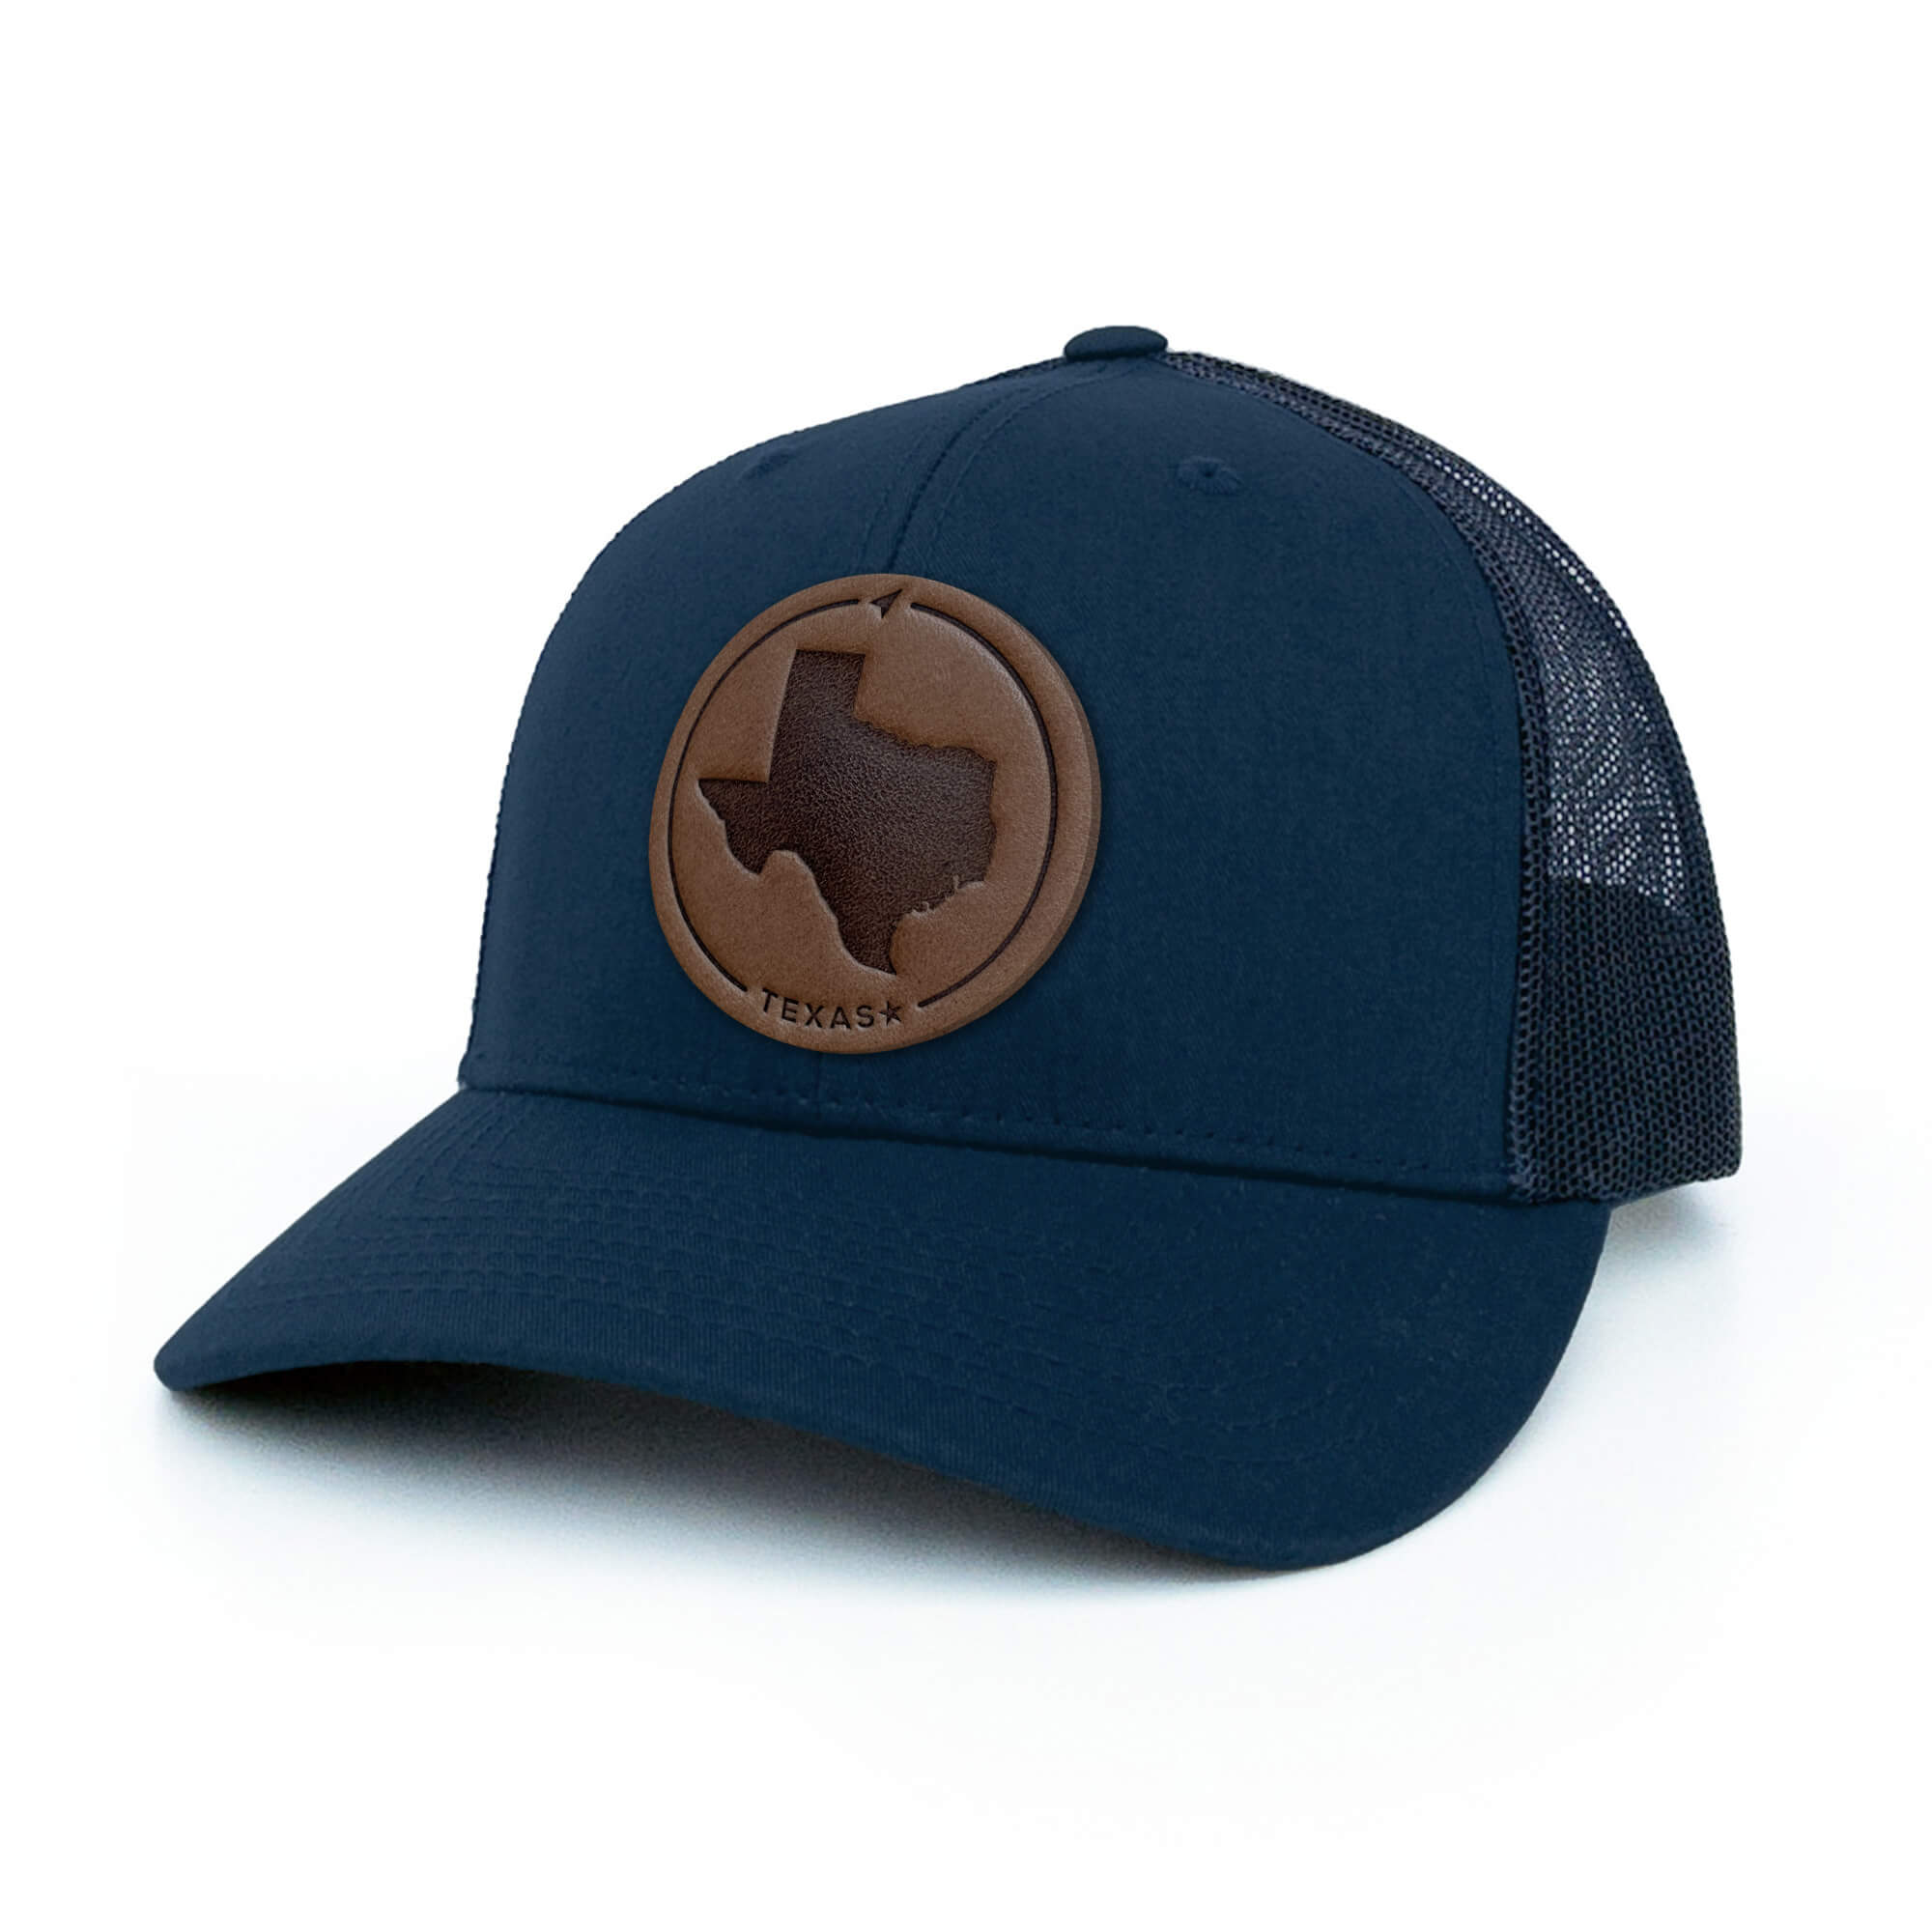 Navy trucker hat with full-grain leather patch of Texas | BLACK-003-002, CHARC-003-002, NAVY-003-002, HGREY-003-002, MOSS-003-002, BROWN-003-002